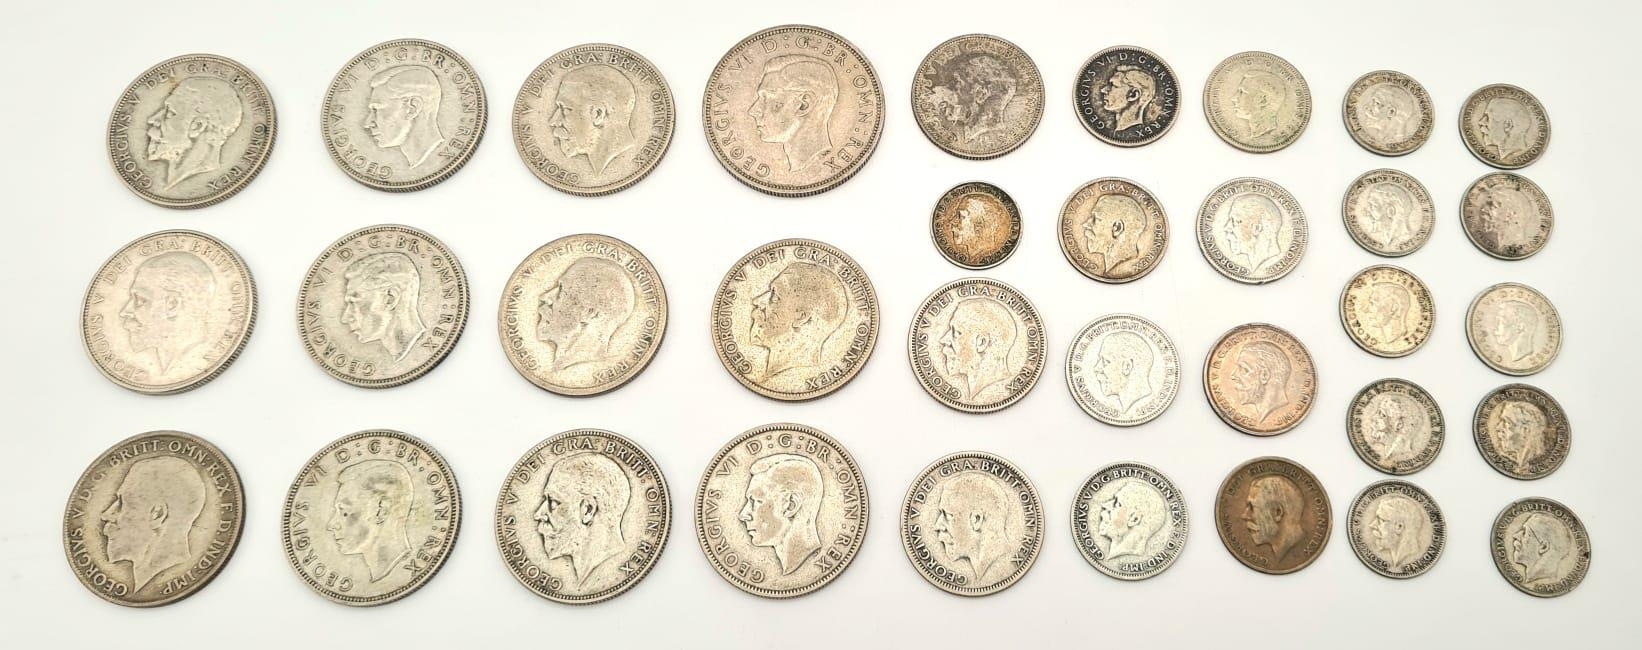 A Selection of Vintage Silver (.500) English Coins. Please see photos for conditions. 185g total - Image 7 of 8